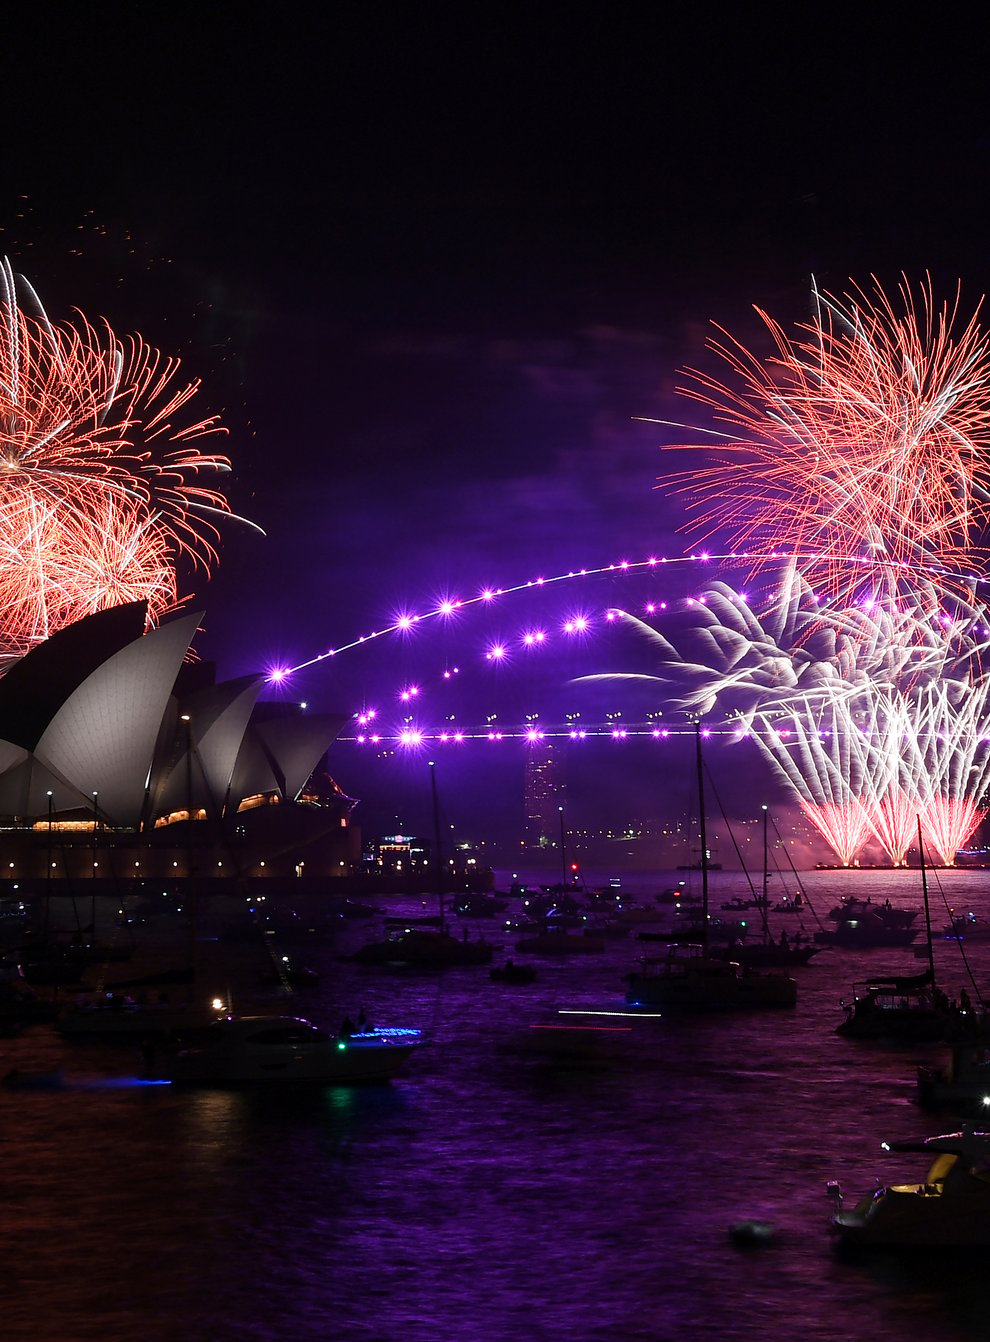 Fireworks explode over Sydney Opera House and Harbour Bridge as New Year’s Eve celebrations begin in Sydney, Friday, Dec. 31, 2021. (Dean Lewins/AAP Image via AP)